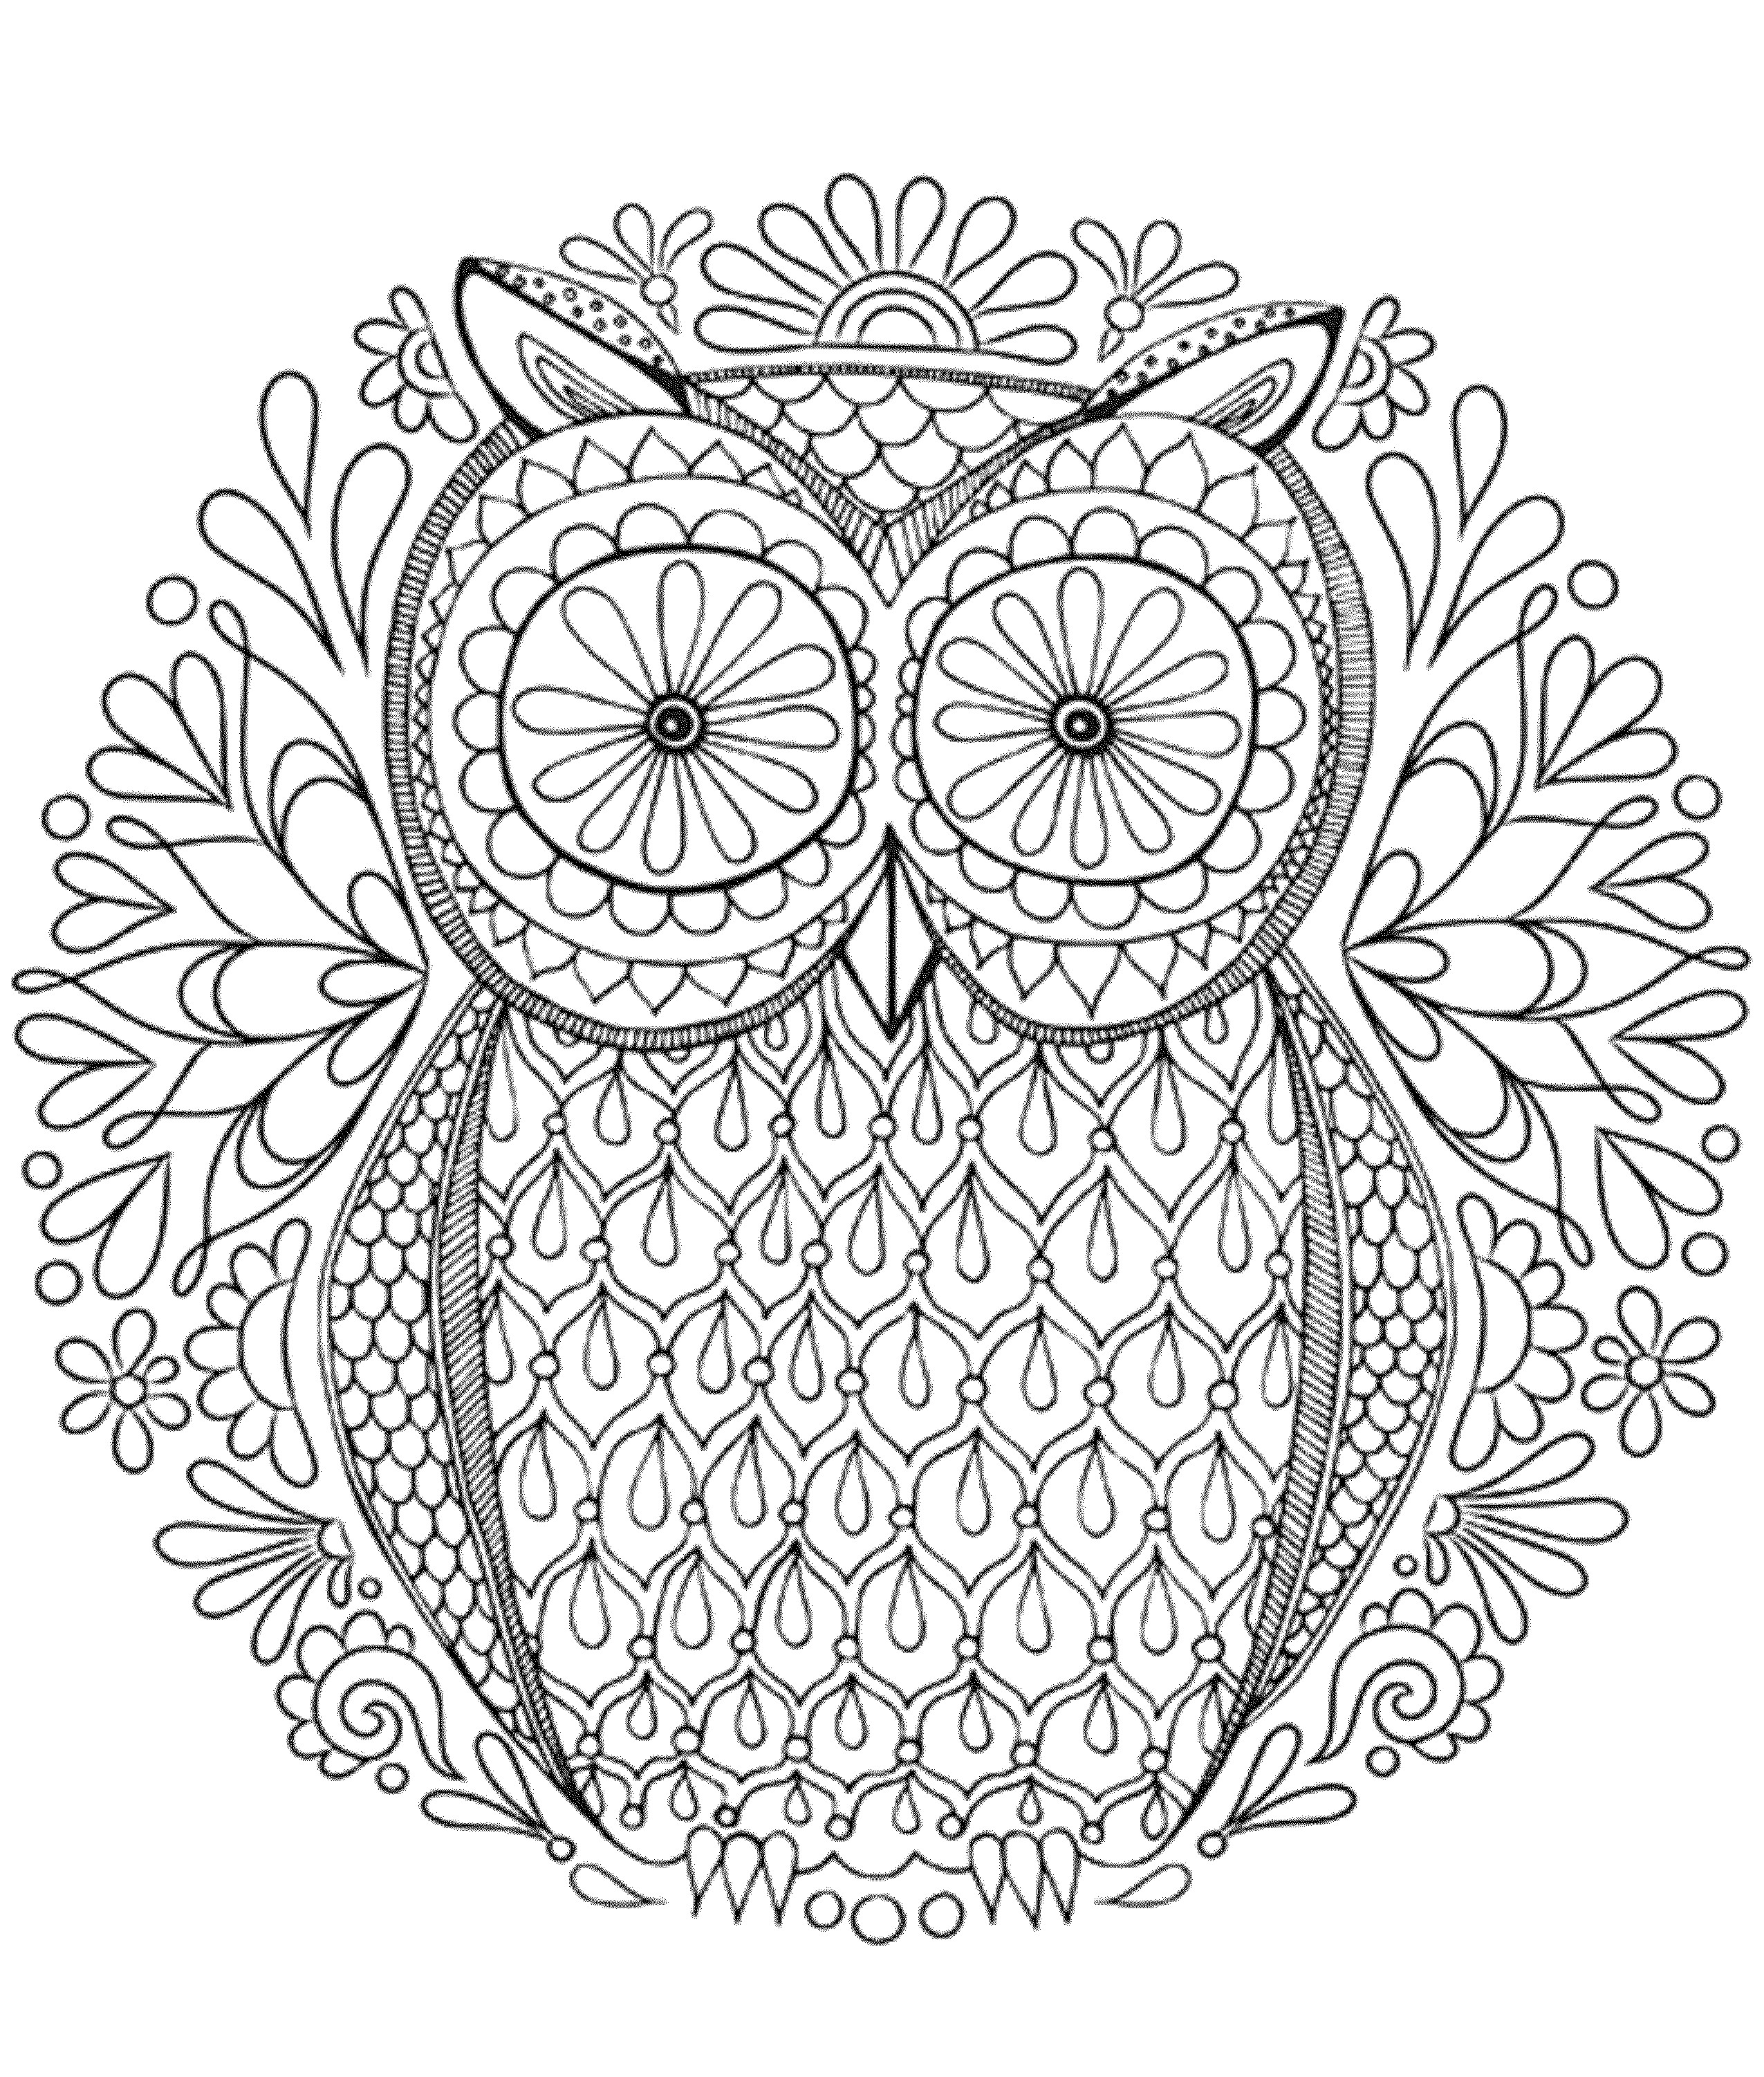 Coloring Pages For Adults To Print Out
 Hard Coloring Pages for Adults Best Coloring Pages For Kids